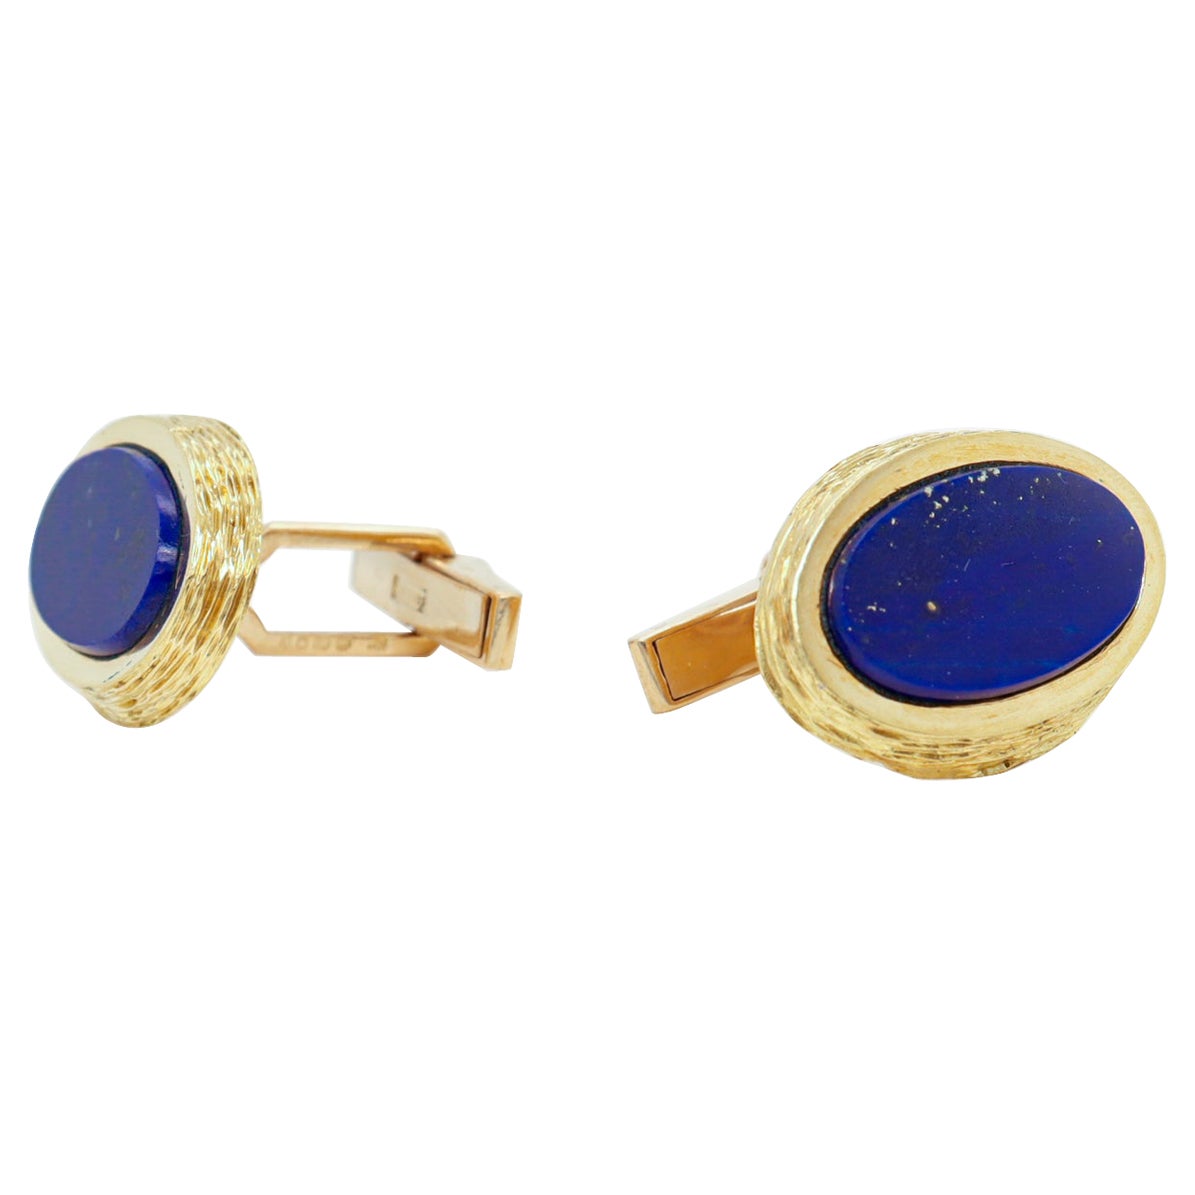 Pair of English Mid-Century Modern 18k Gold & Lapis Cufflinks by Kutchinsky For Sale